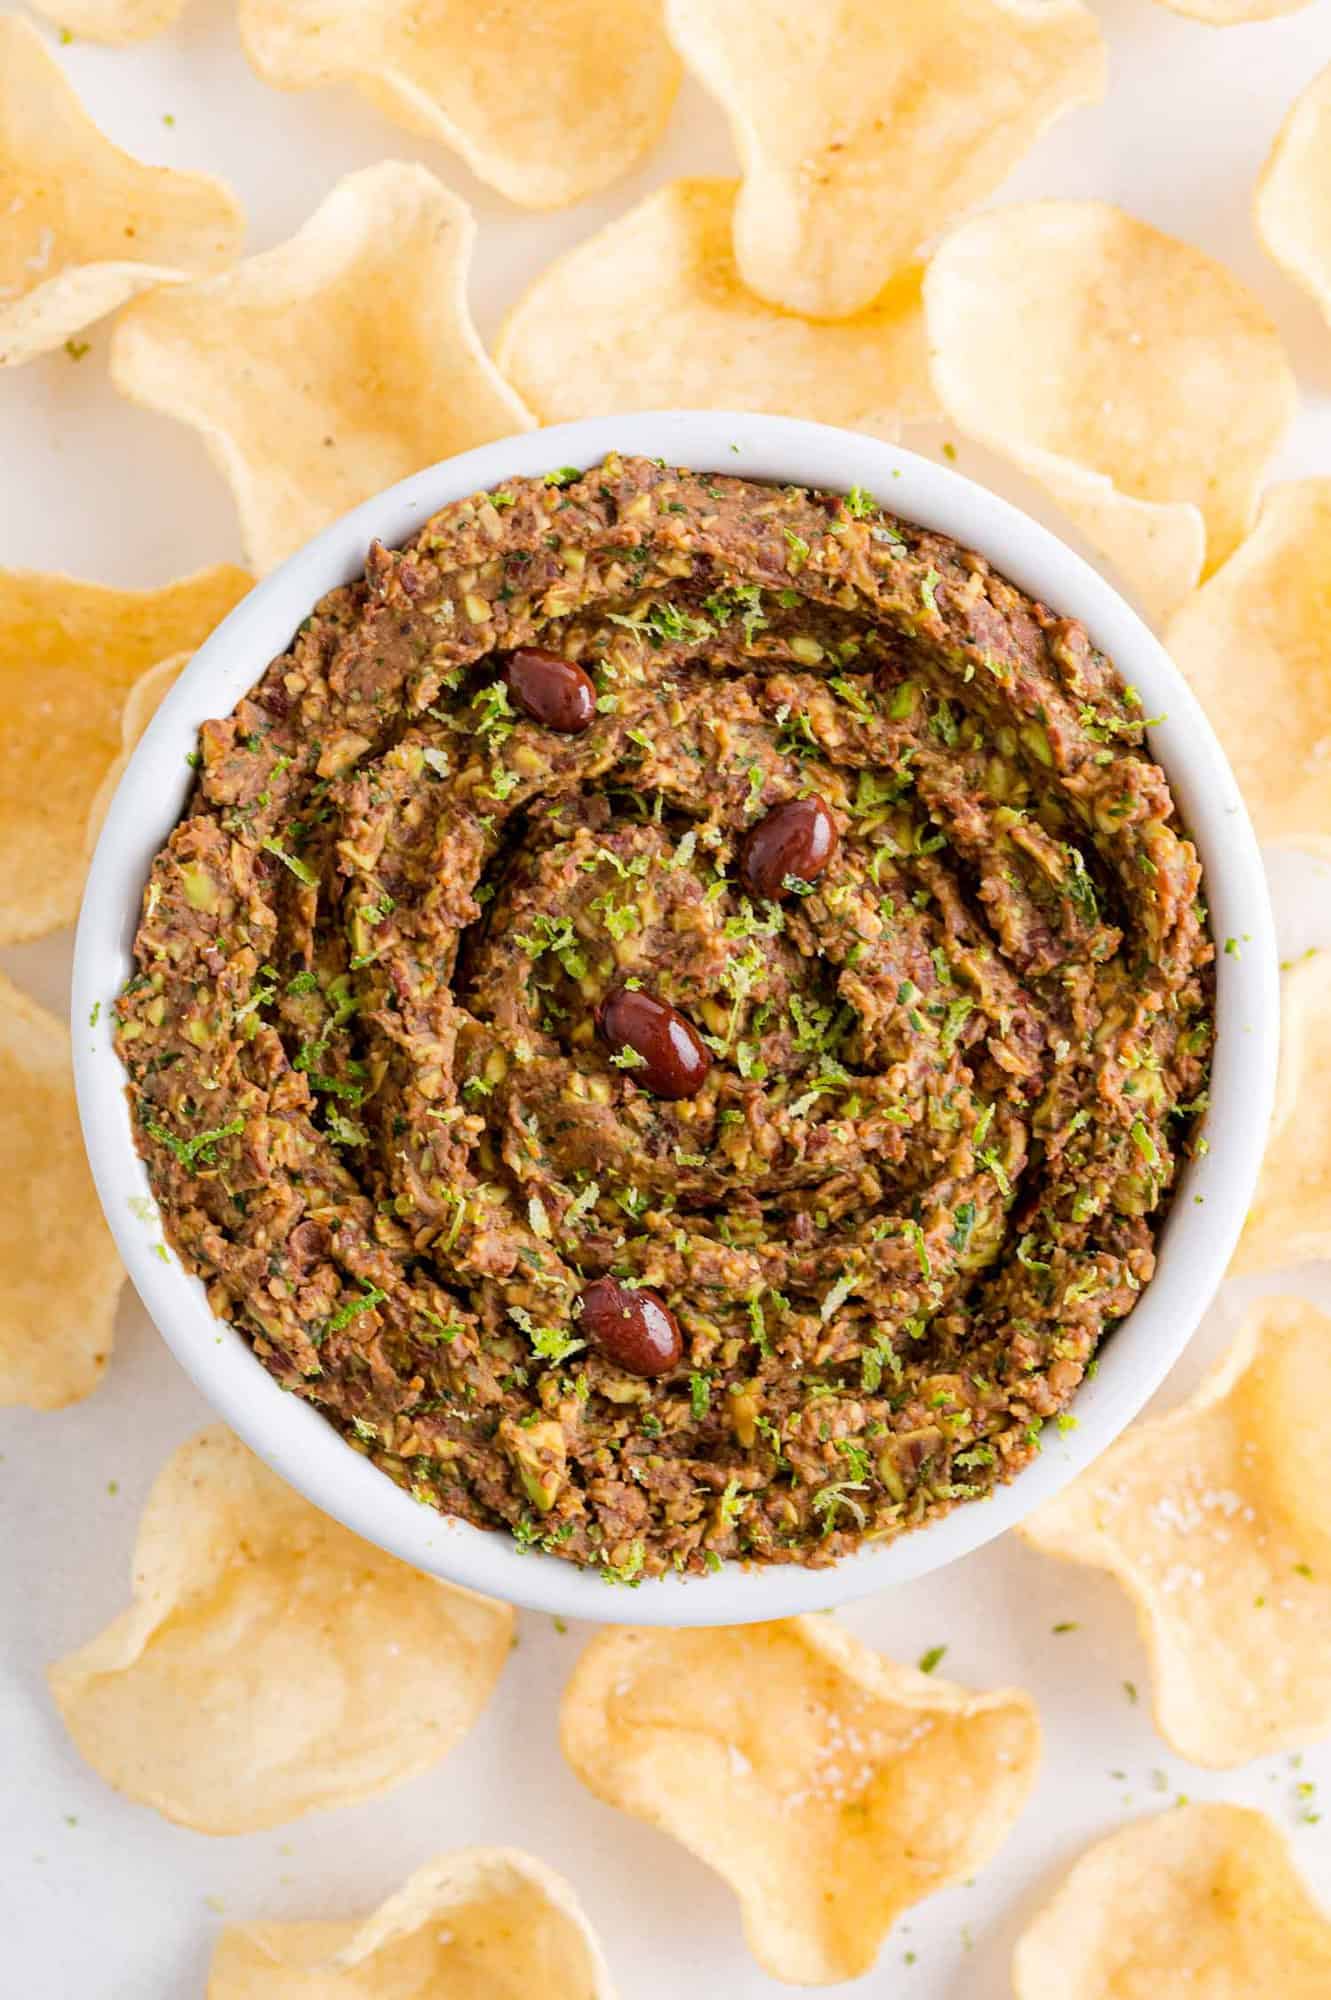 Overhead view of bean dip with tortilla chips.